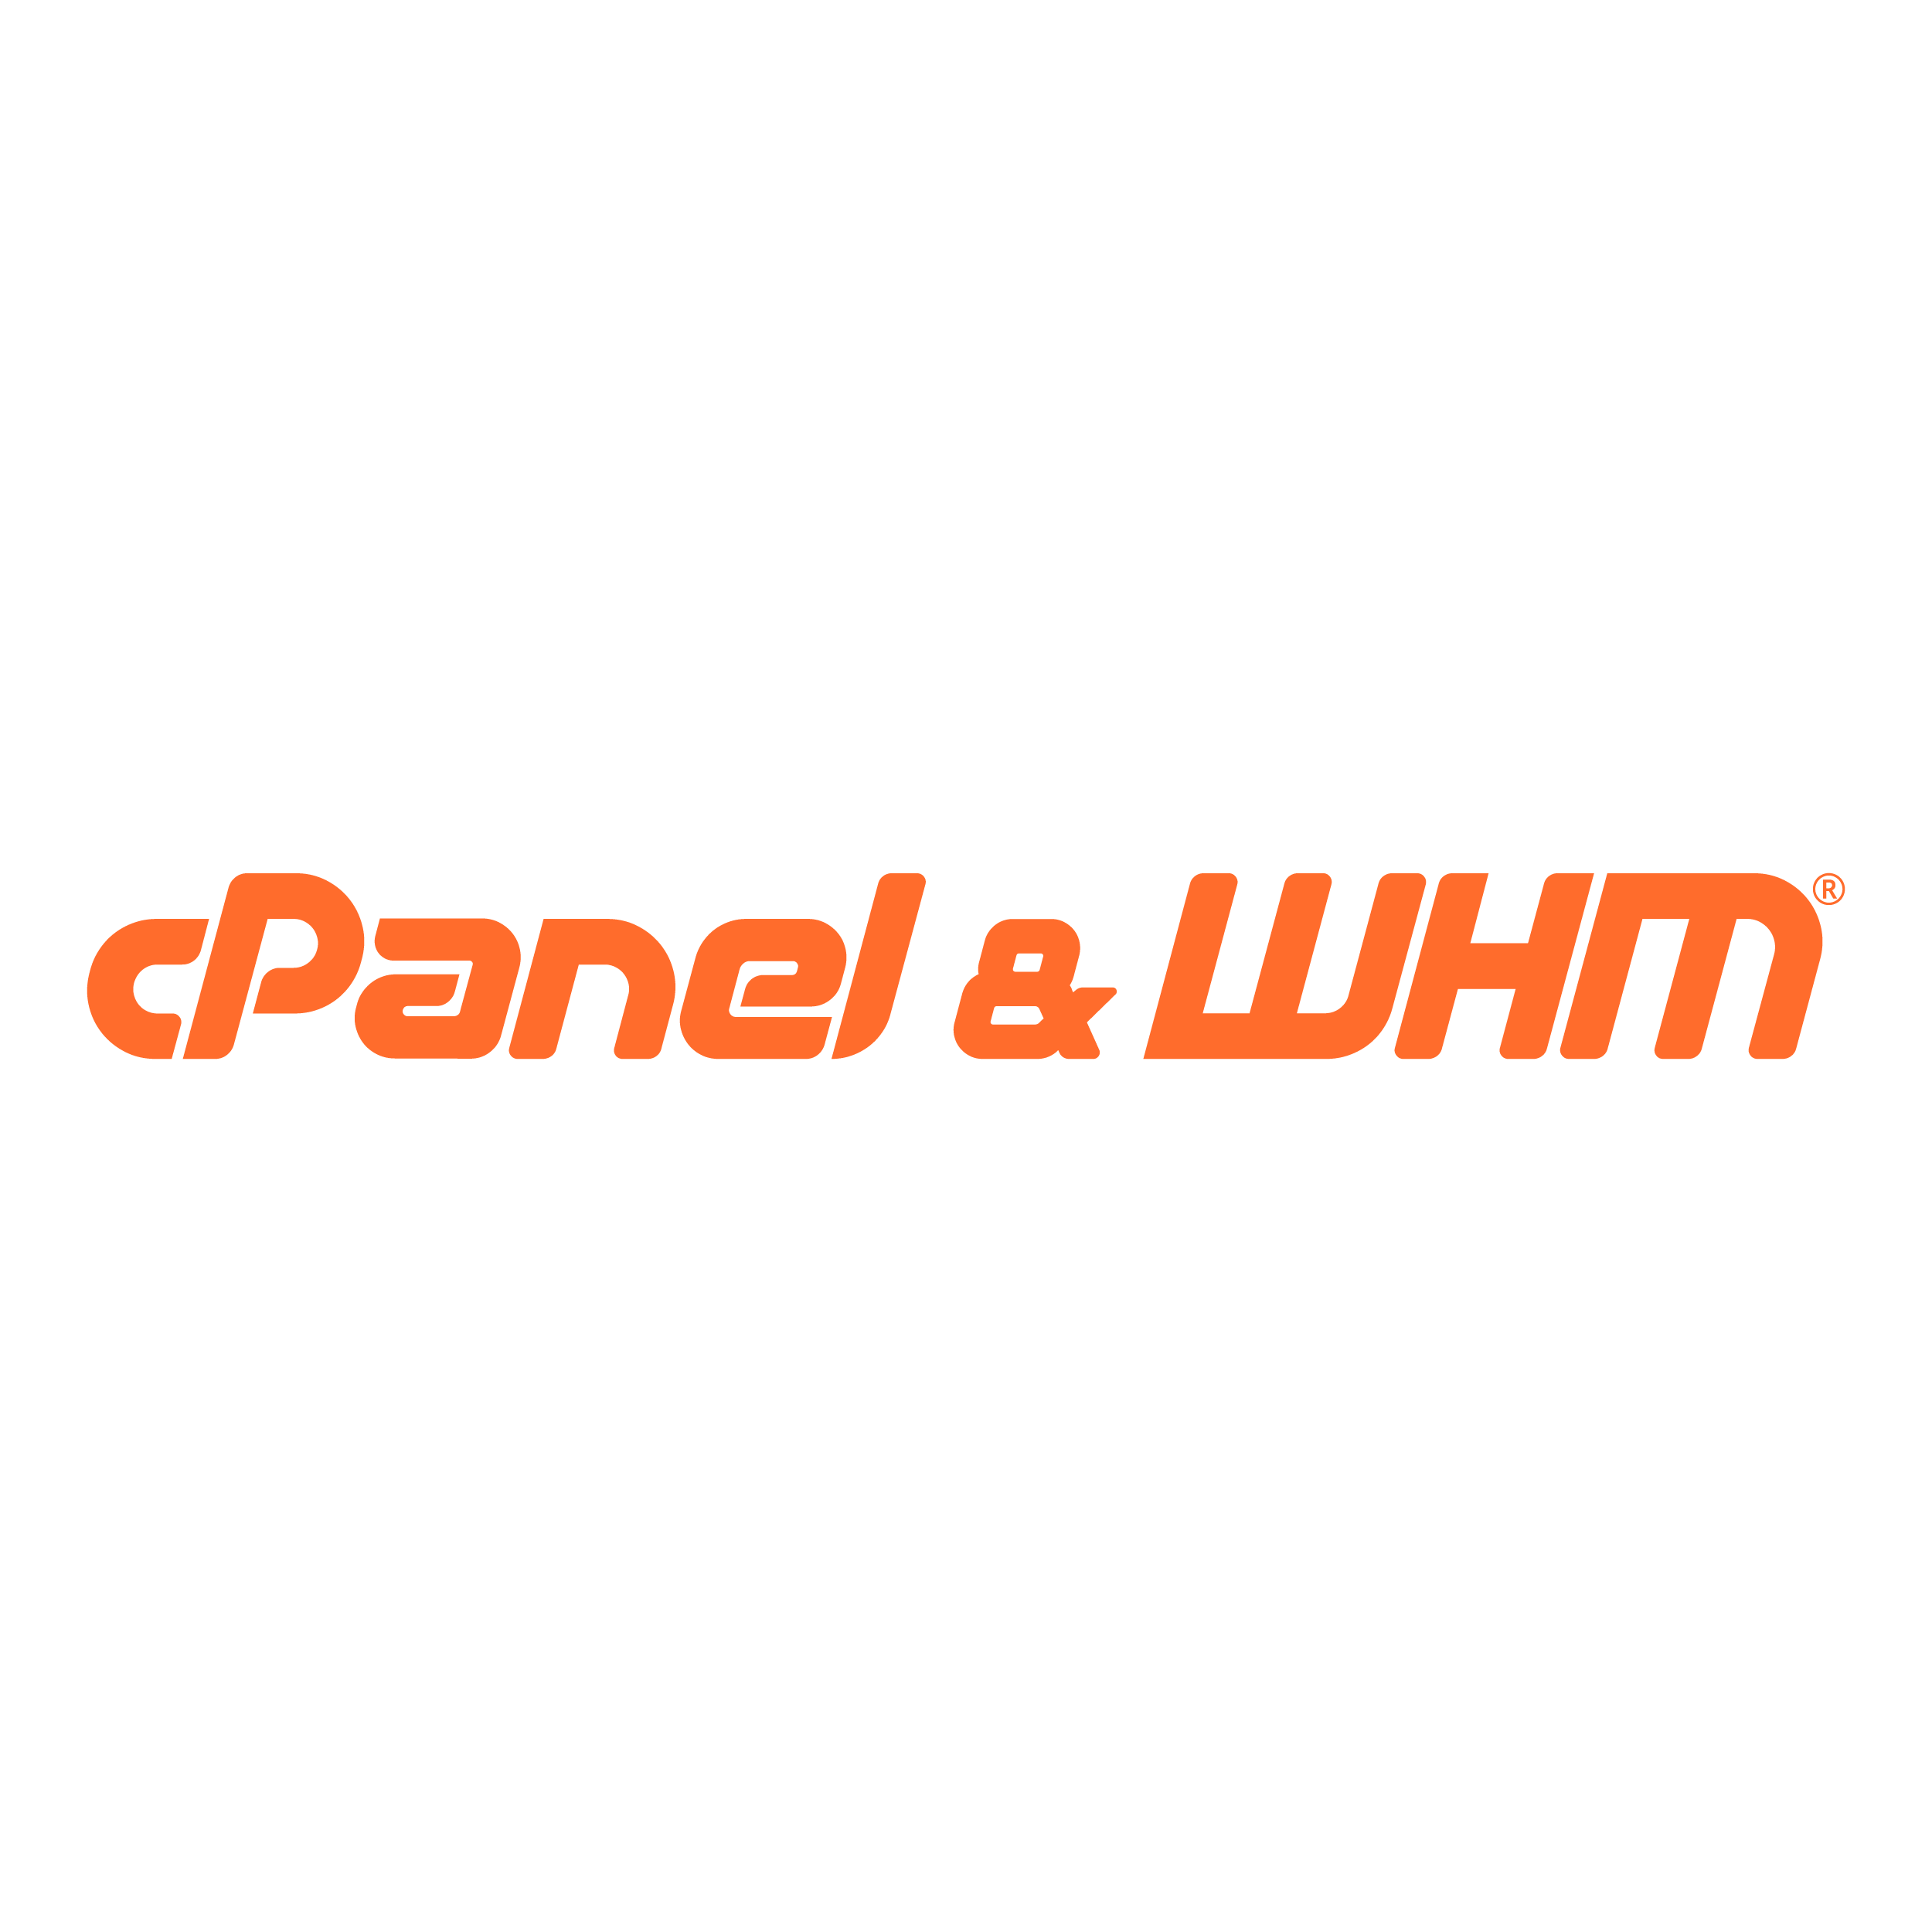 cPanel and WHM Logo Transparent Image